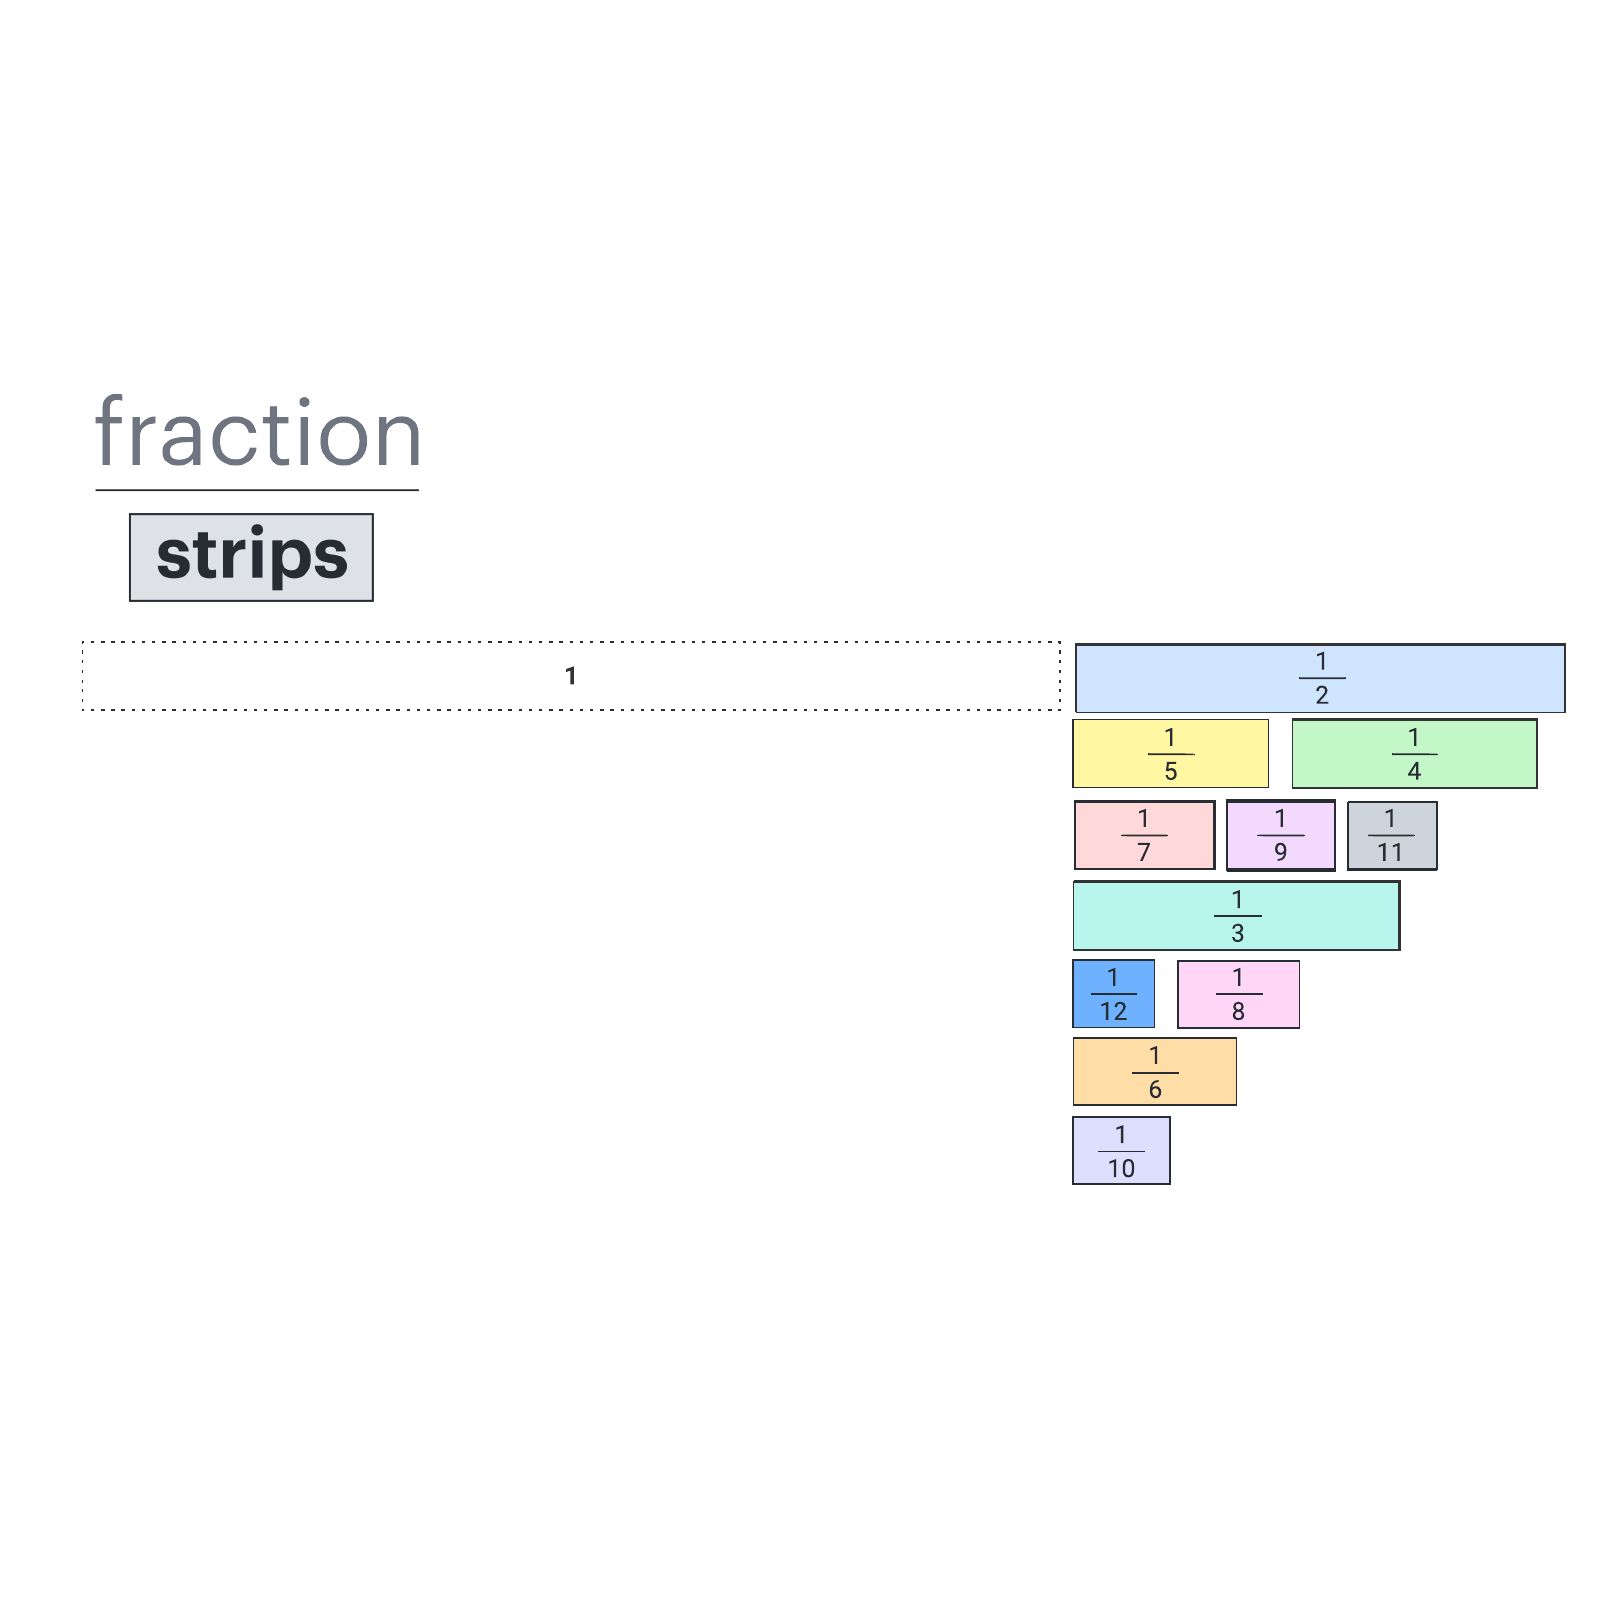 Fraction strips example